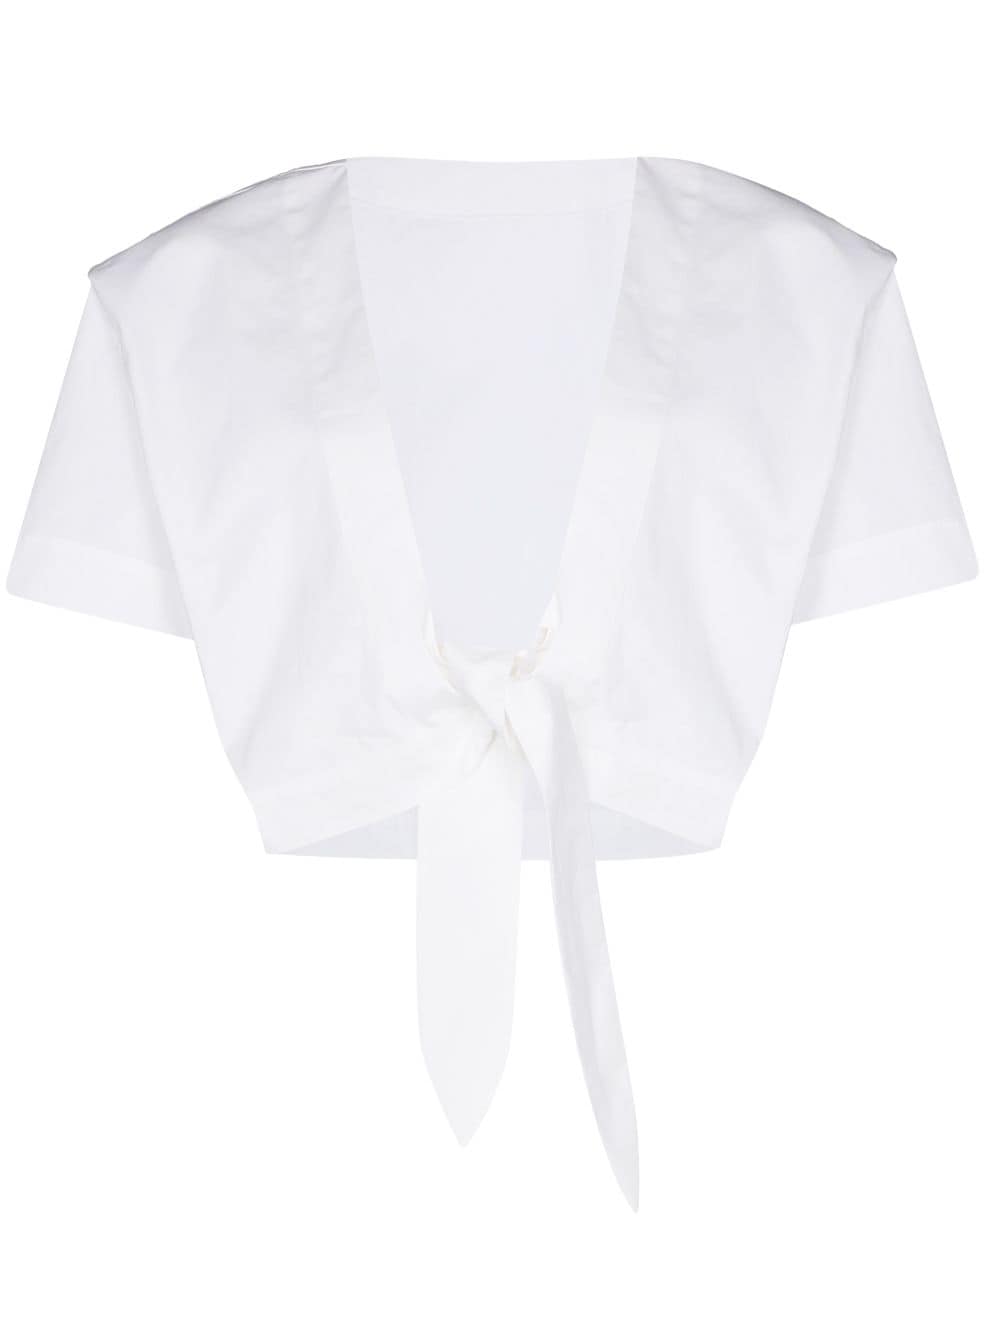 SIR. Anja tie-front top - White